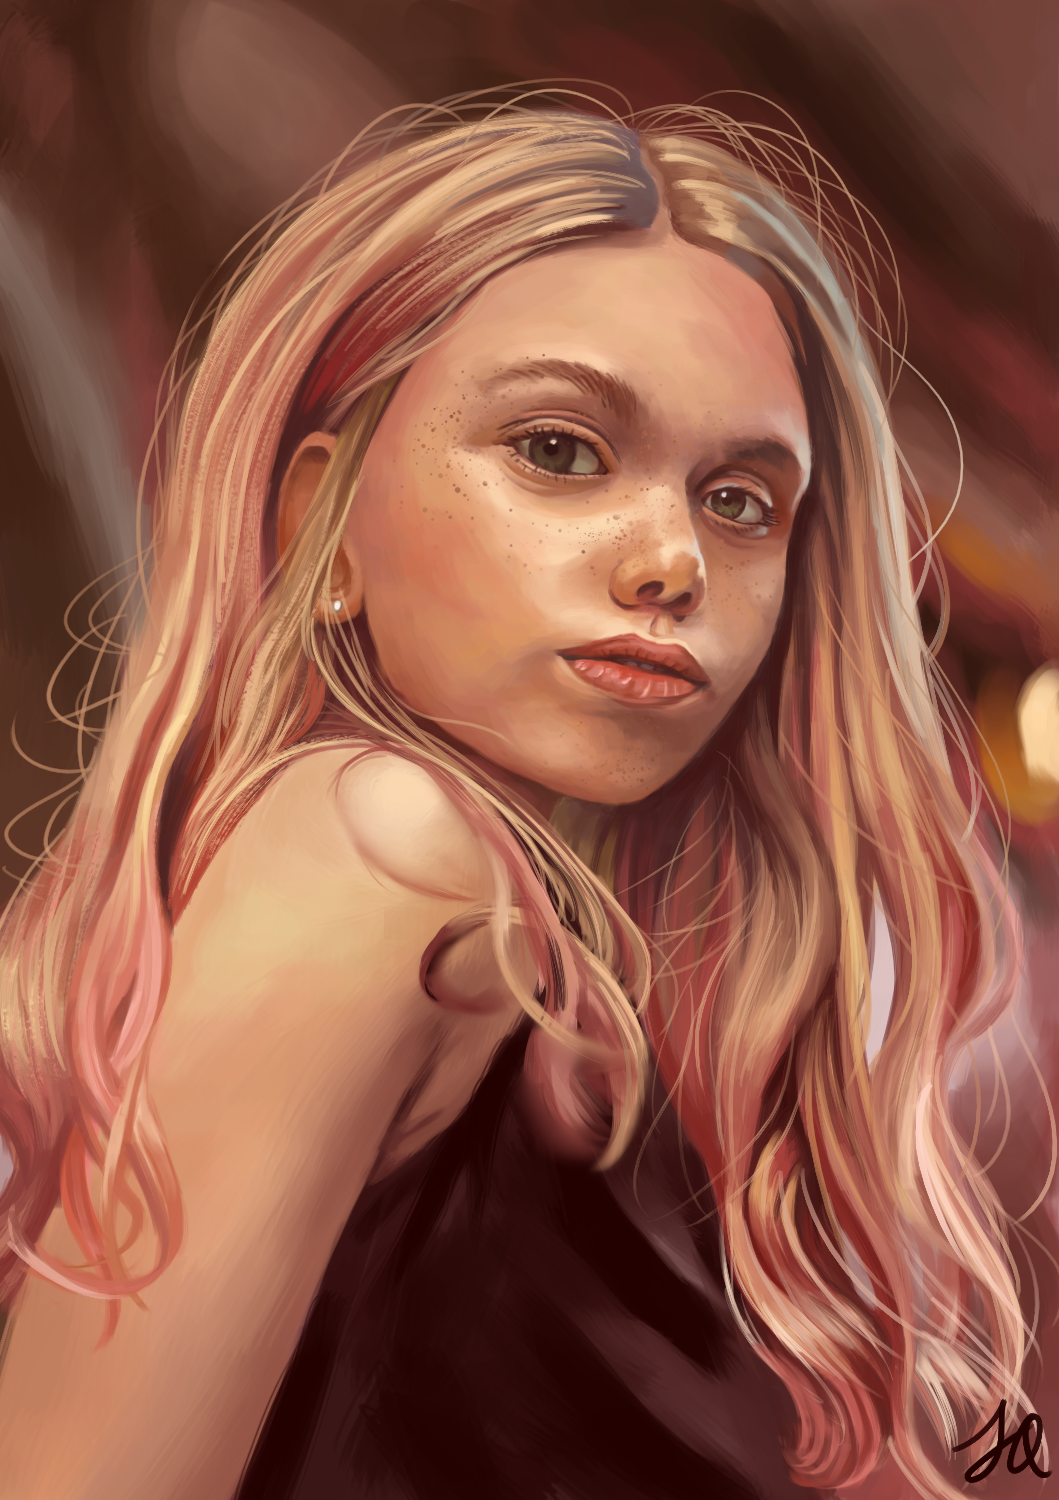 A digital painting photo study of a young girl with pale skin and long, wavy, blonde and pink hair, looking 3/4 and slightly down towards the camera. She is wearing a sleeveless black top and has olive-coloured eyes.